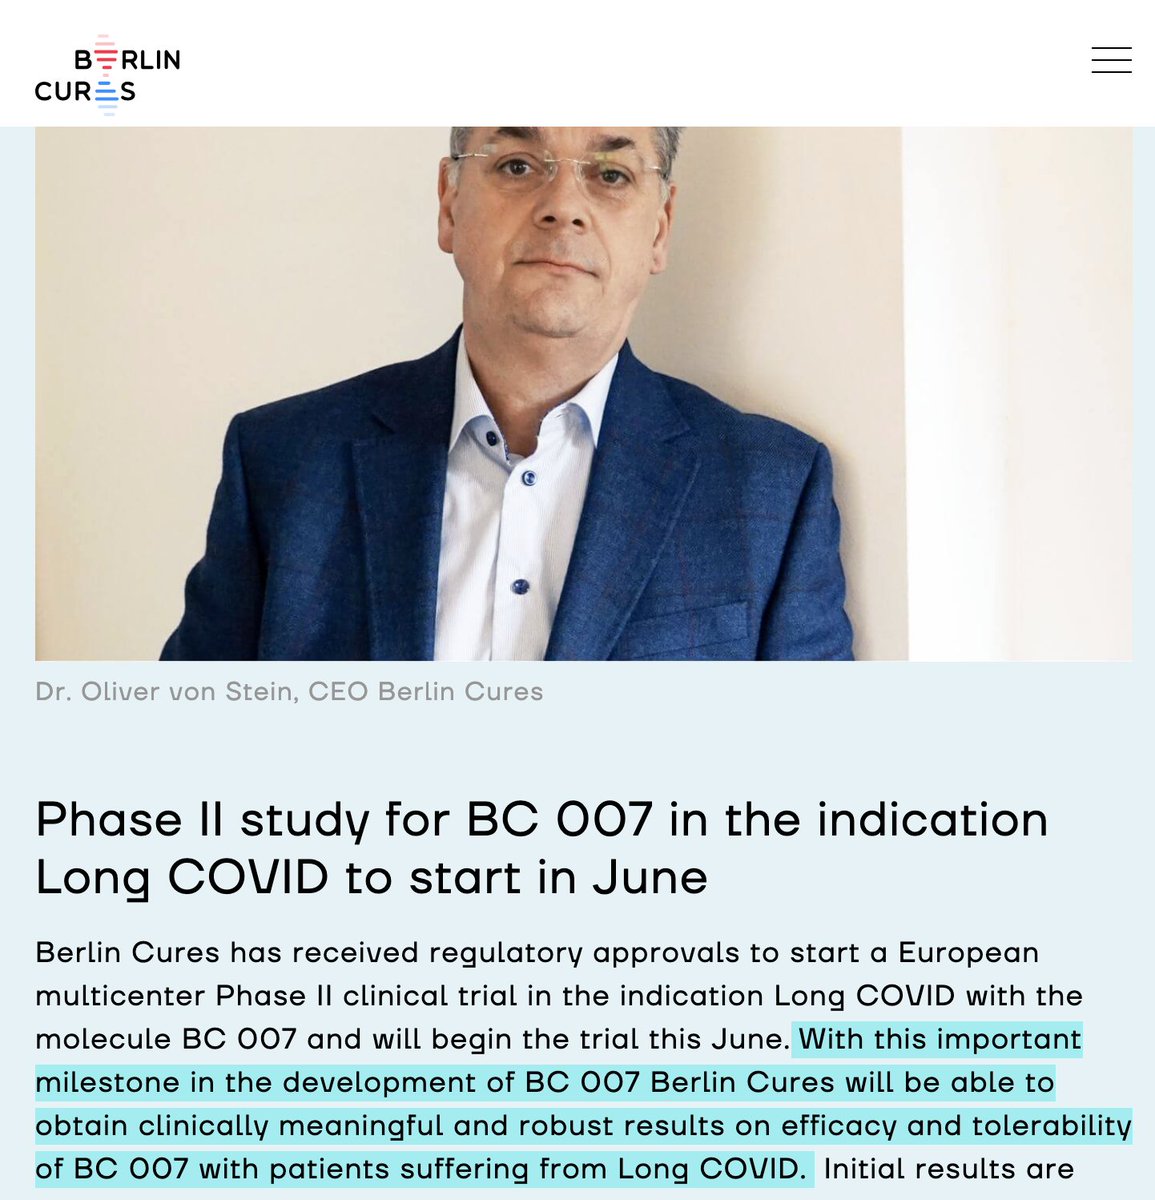 News von BC007:
'Berlin Cures has received regulatory approvals to start a European multicenter Phase II clinical trial in the indication Long COVID with the molecule BC 007 and will begin the trial this June'
'Initial results are expected in early 2024.'
berlincures.com/en/news/new-ceo